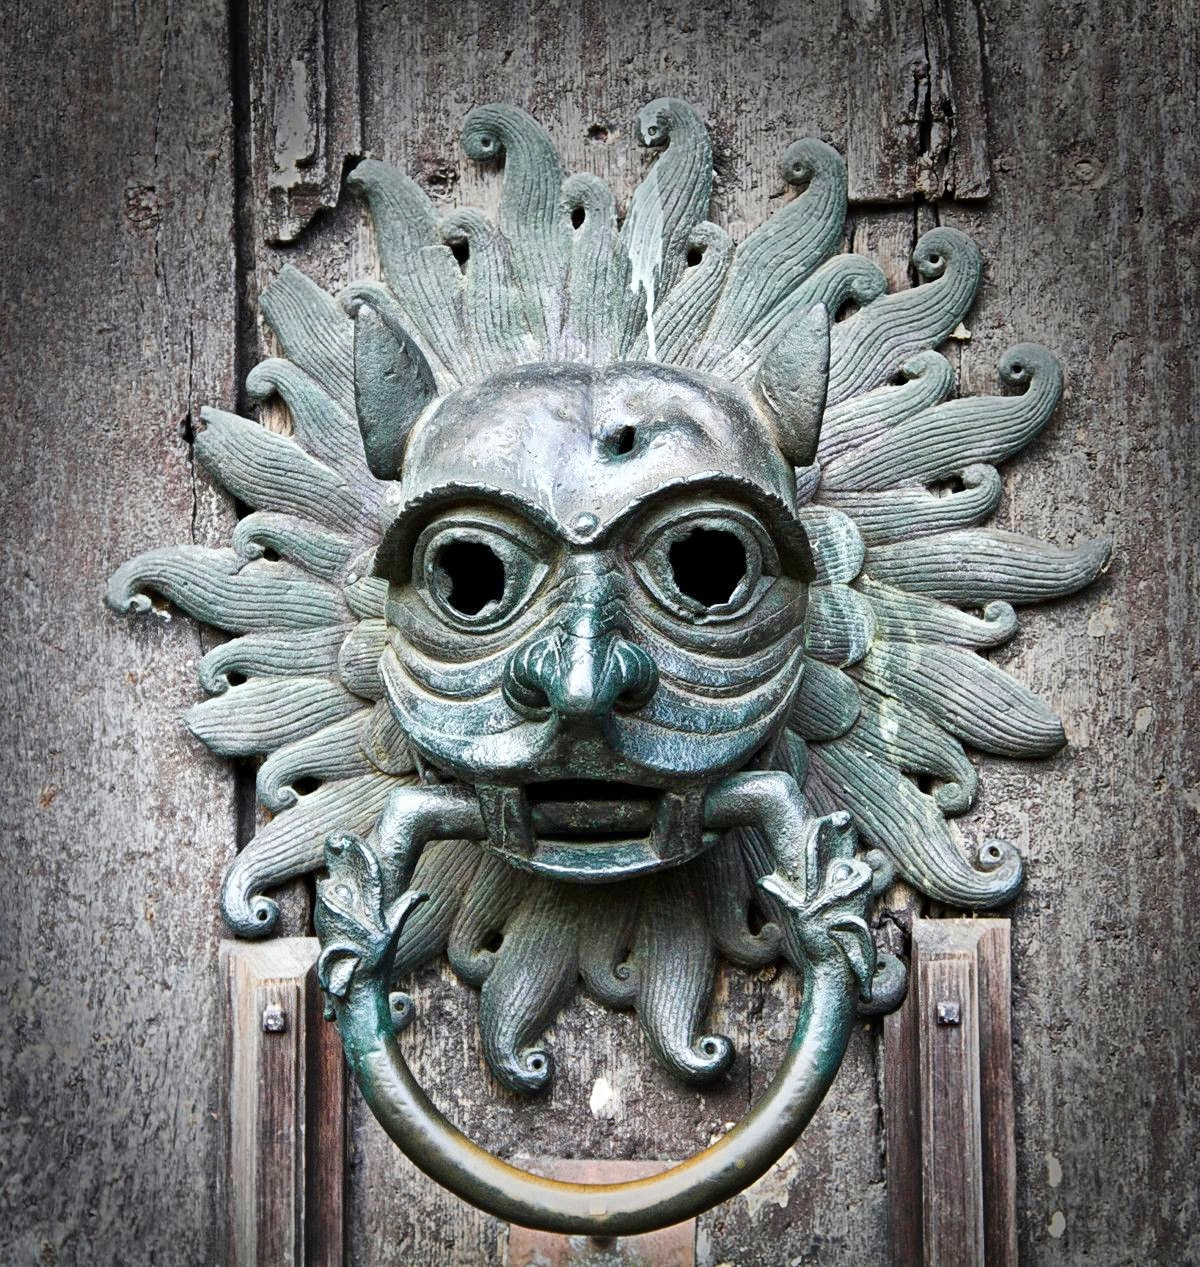 Door knocker at Durham Cathedral. Credit Michael Beckwith